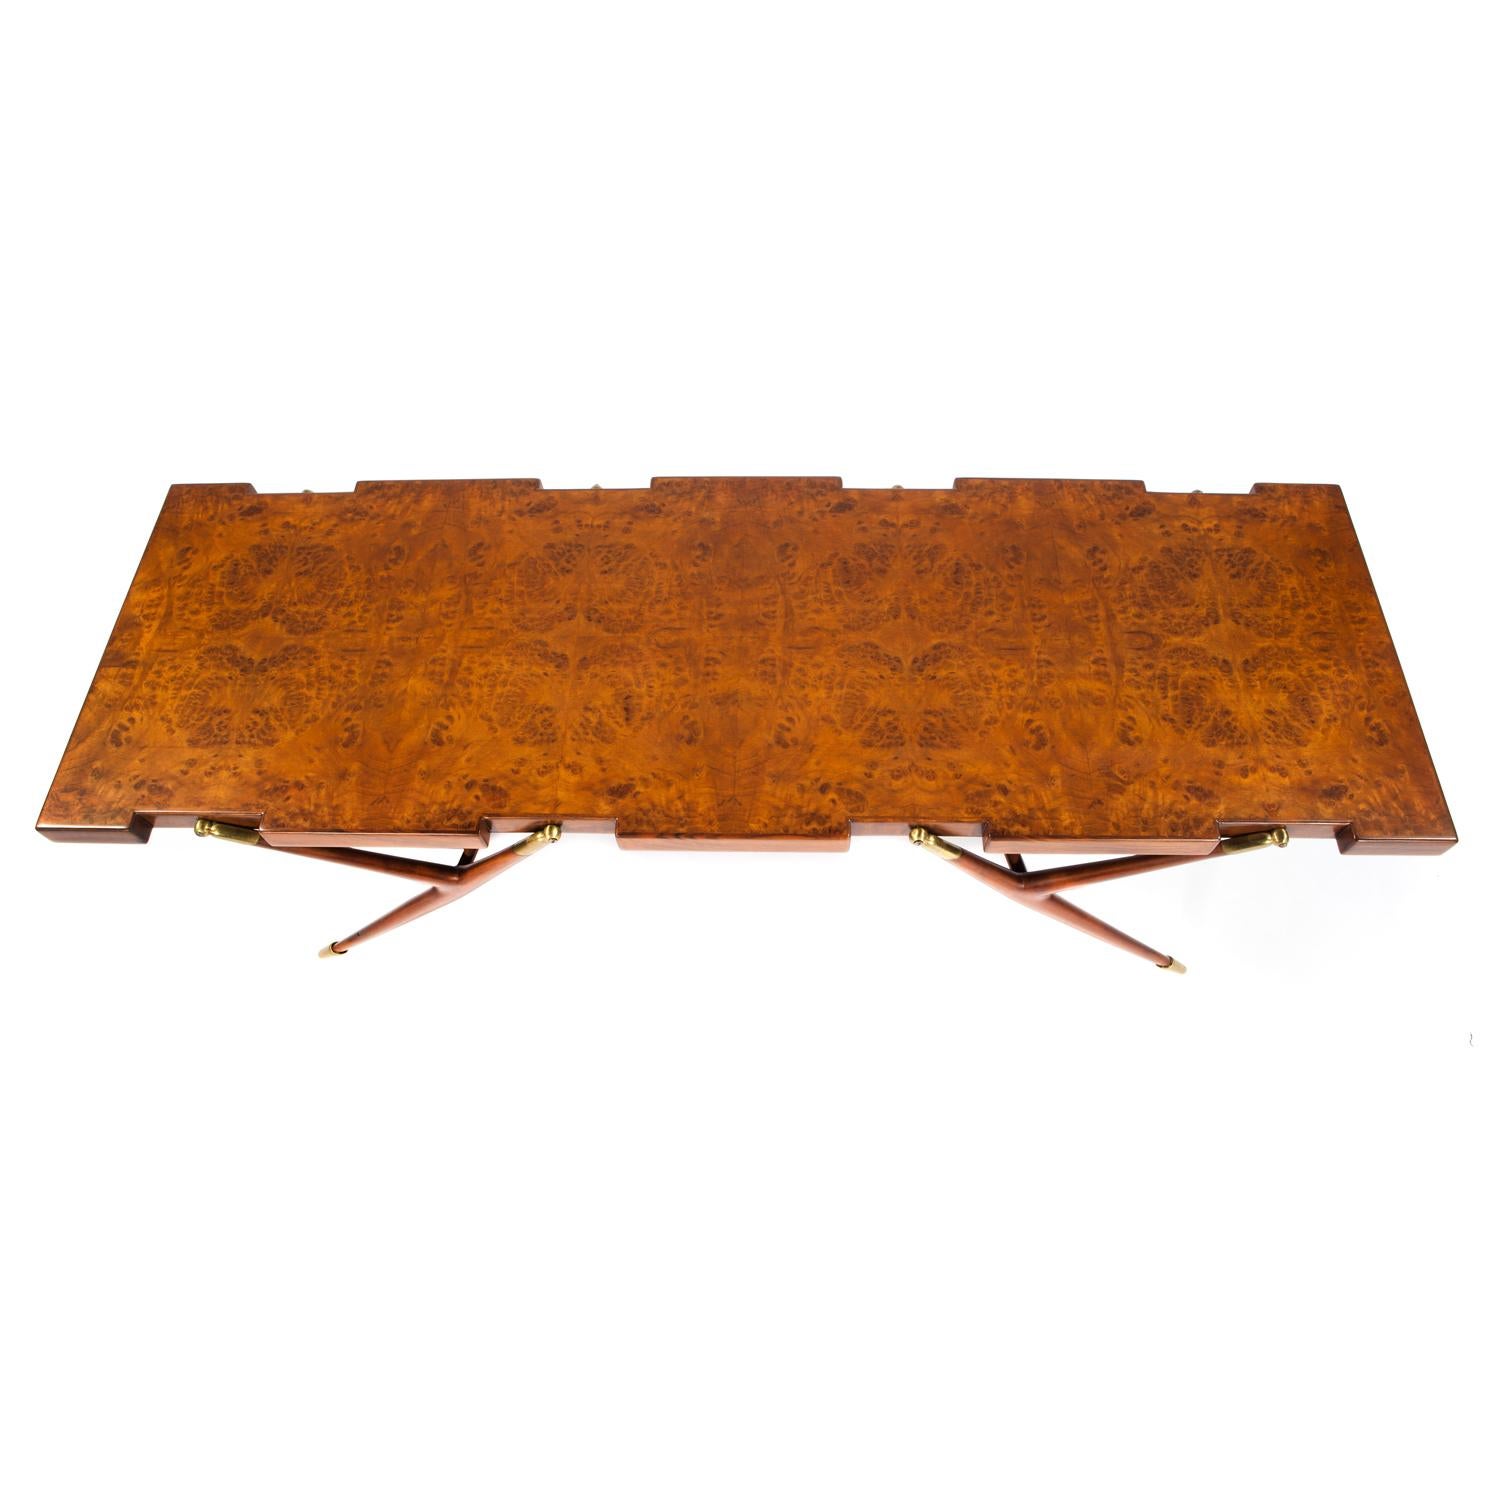 American Ico Parisi Sculptural Coffee Table in Burled Walnut with Brass Fittings, 1950s